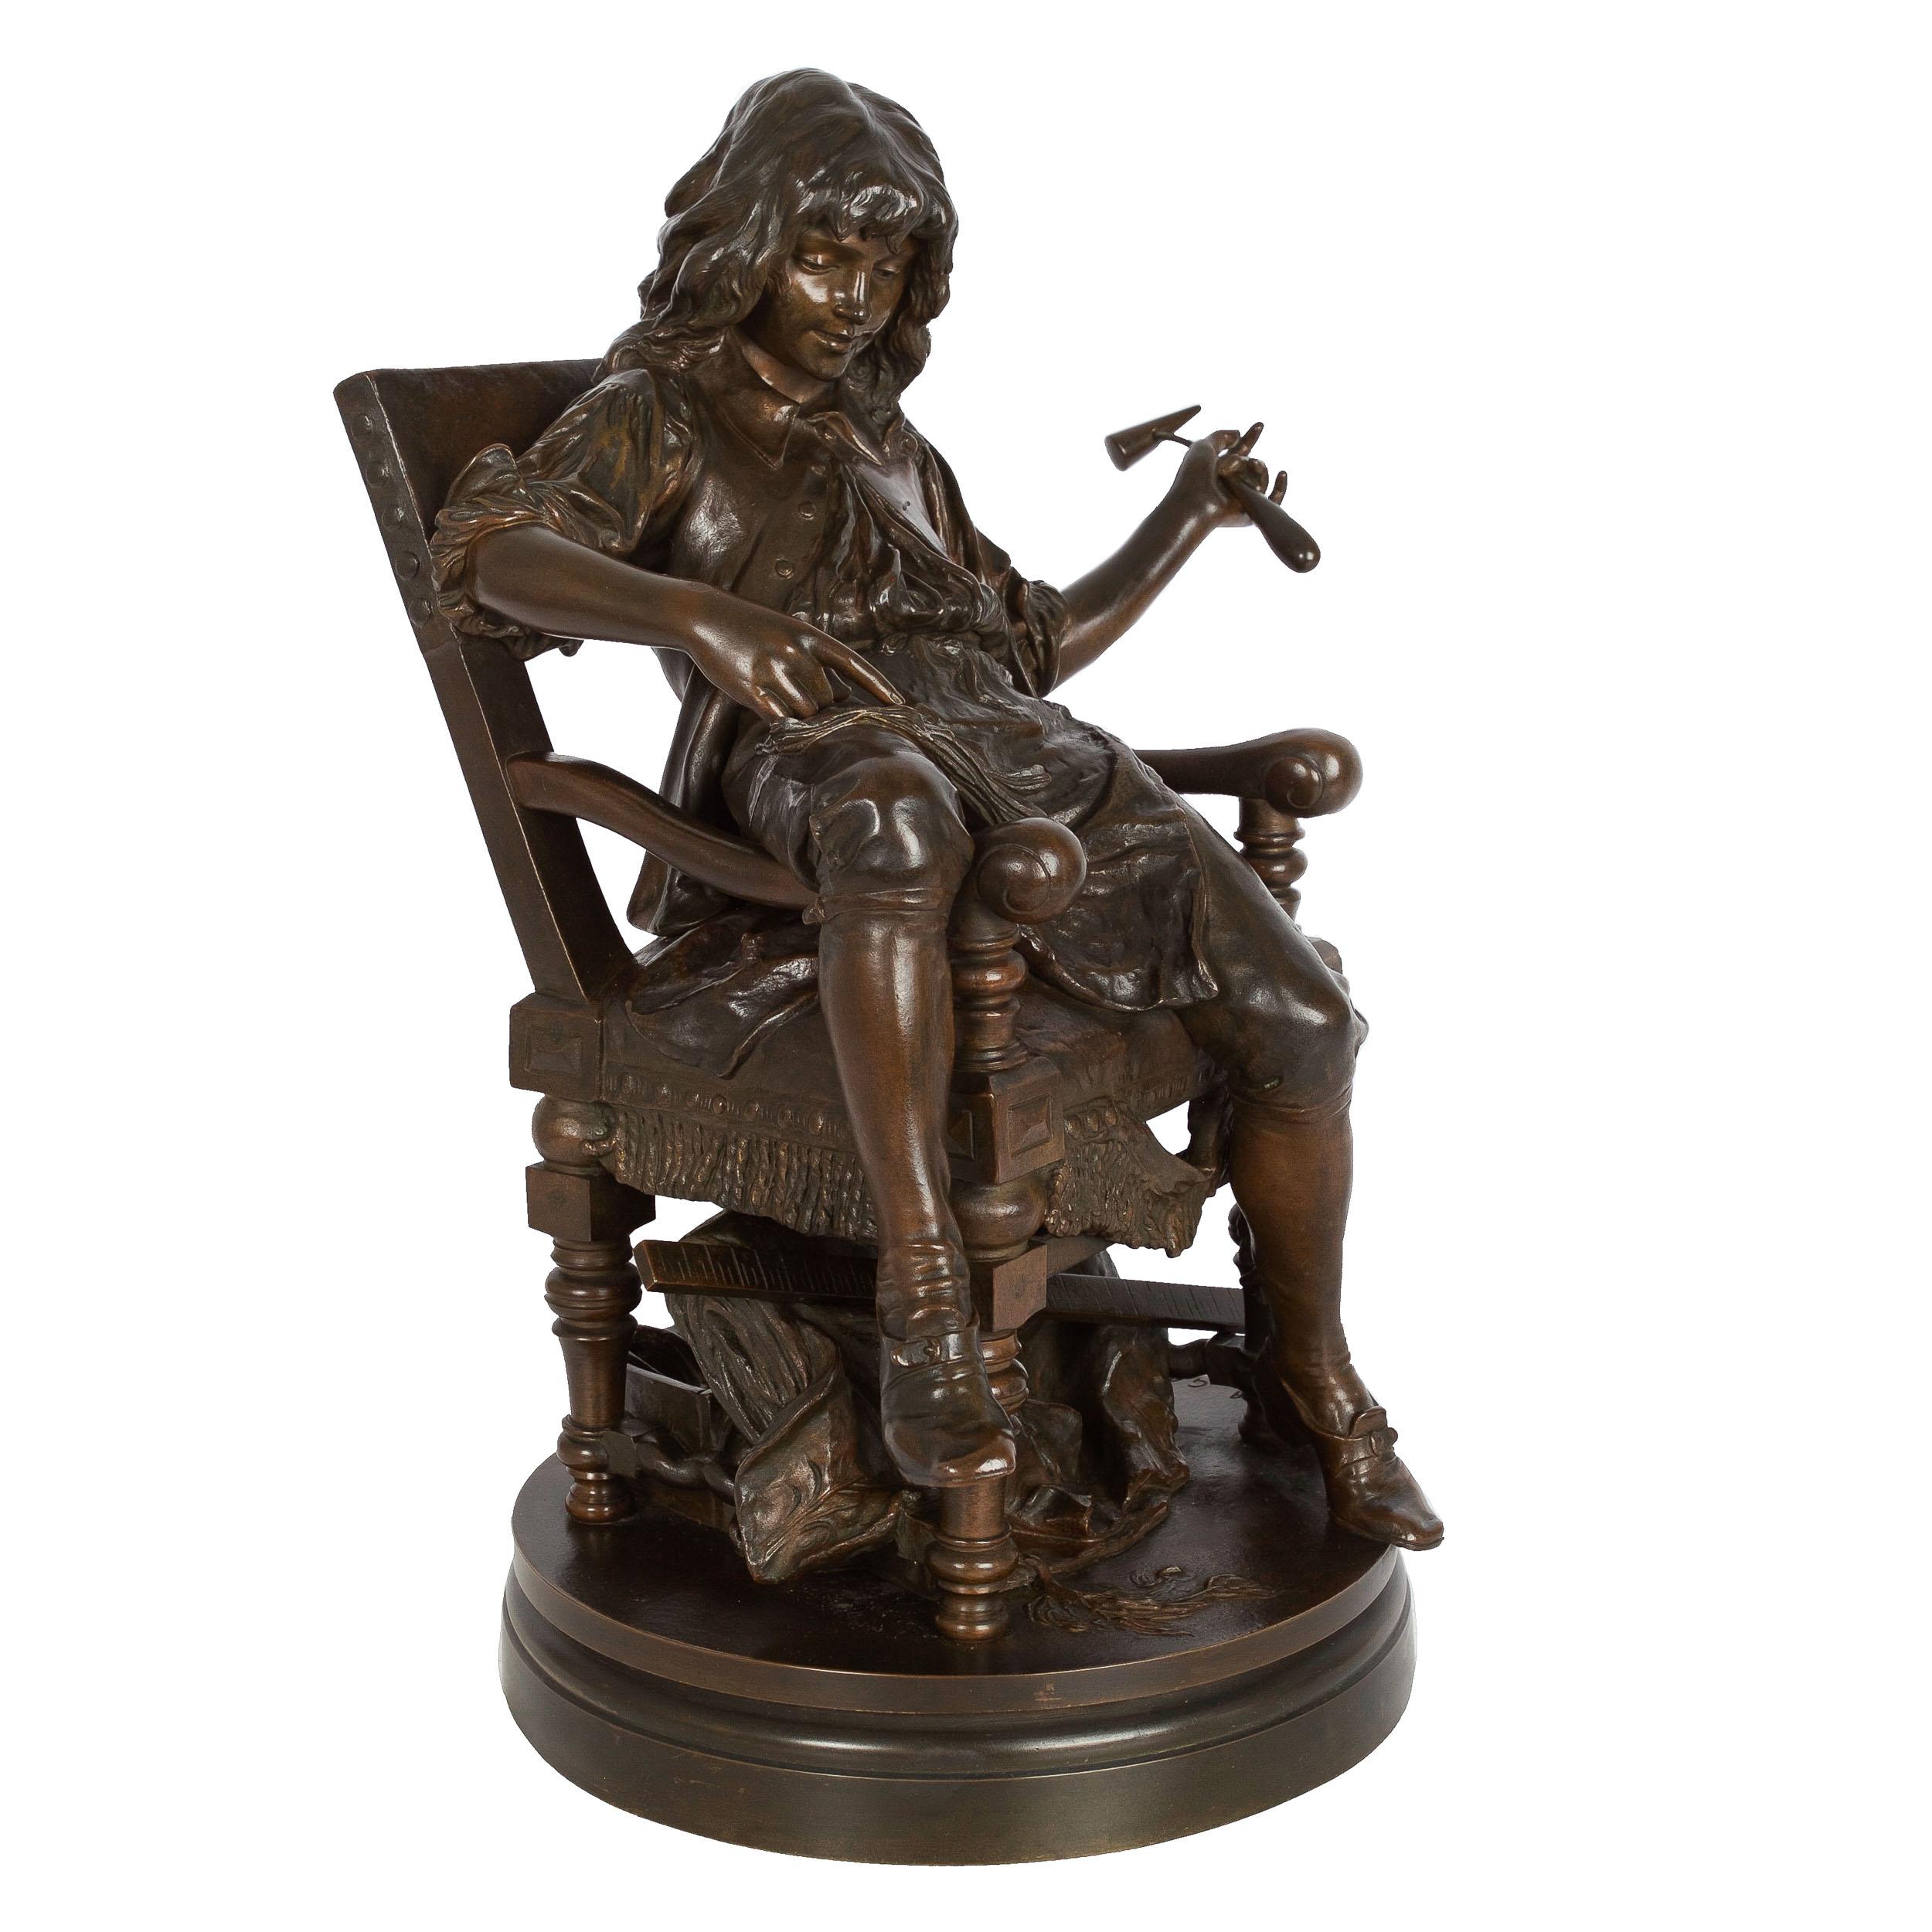 A finely cast model of Jean-Baptiste Poquelin (French, 1622-1673), known as Molière, it is a wonderful historical study that captures the playwright and actor as a carefree youth. Reclined in a worn out chair, and judging by the worn out covering